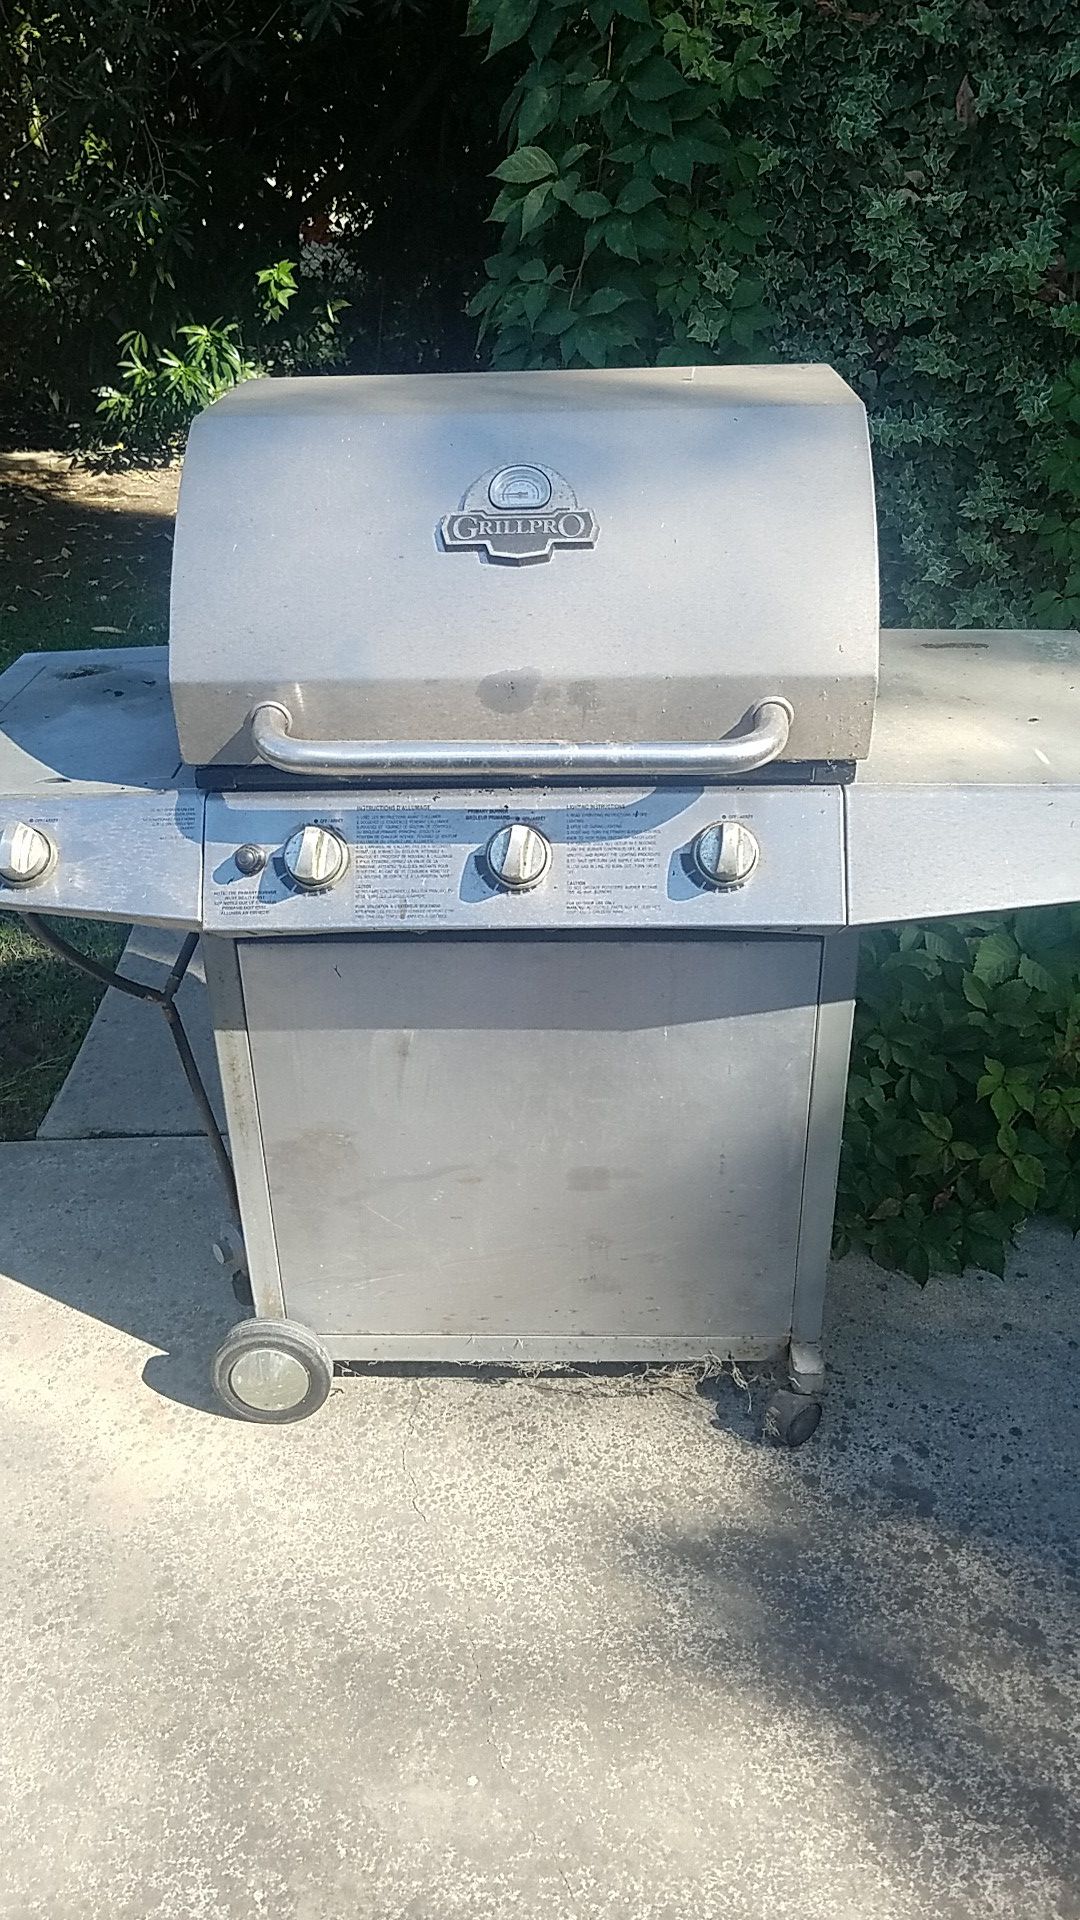 Grillpro gas BBQ grill